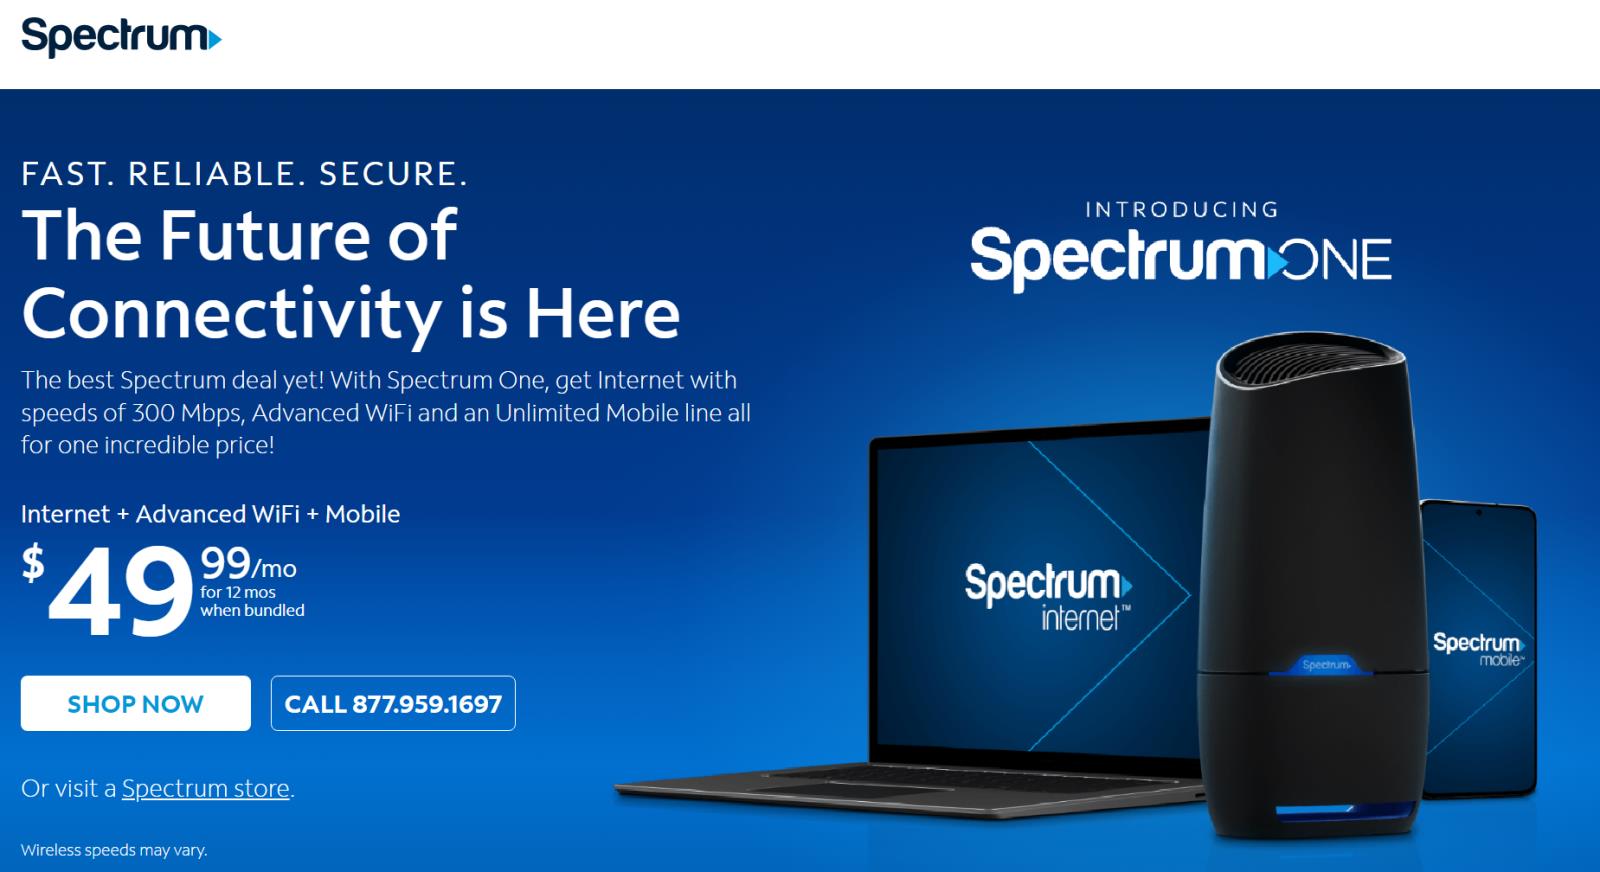 Charter Communications Introduces Spectrum One Internet And Mobile Plan Bundle